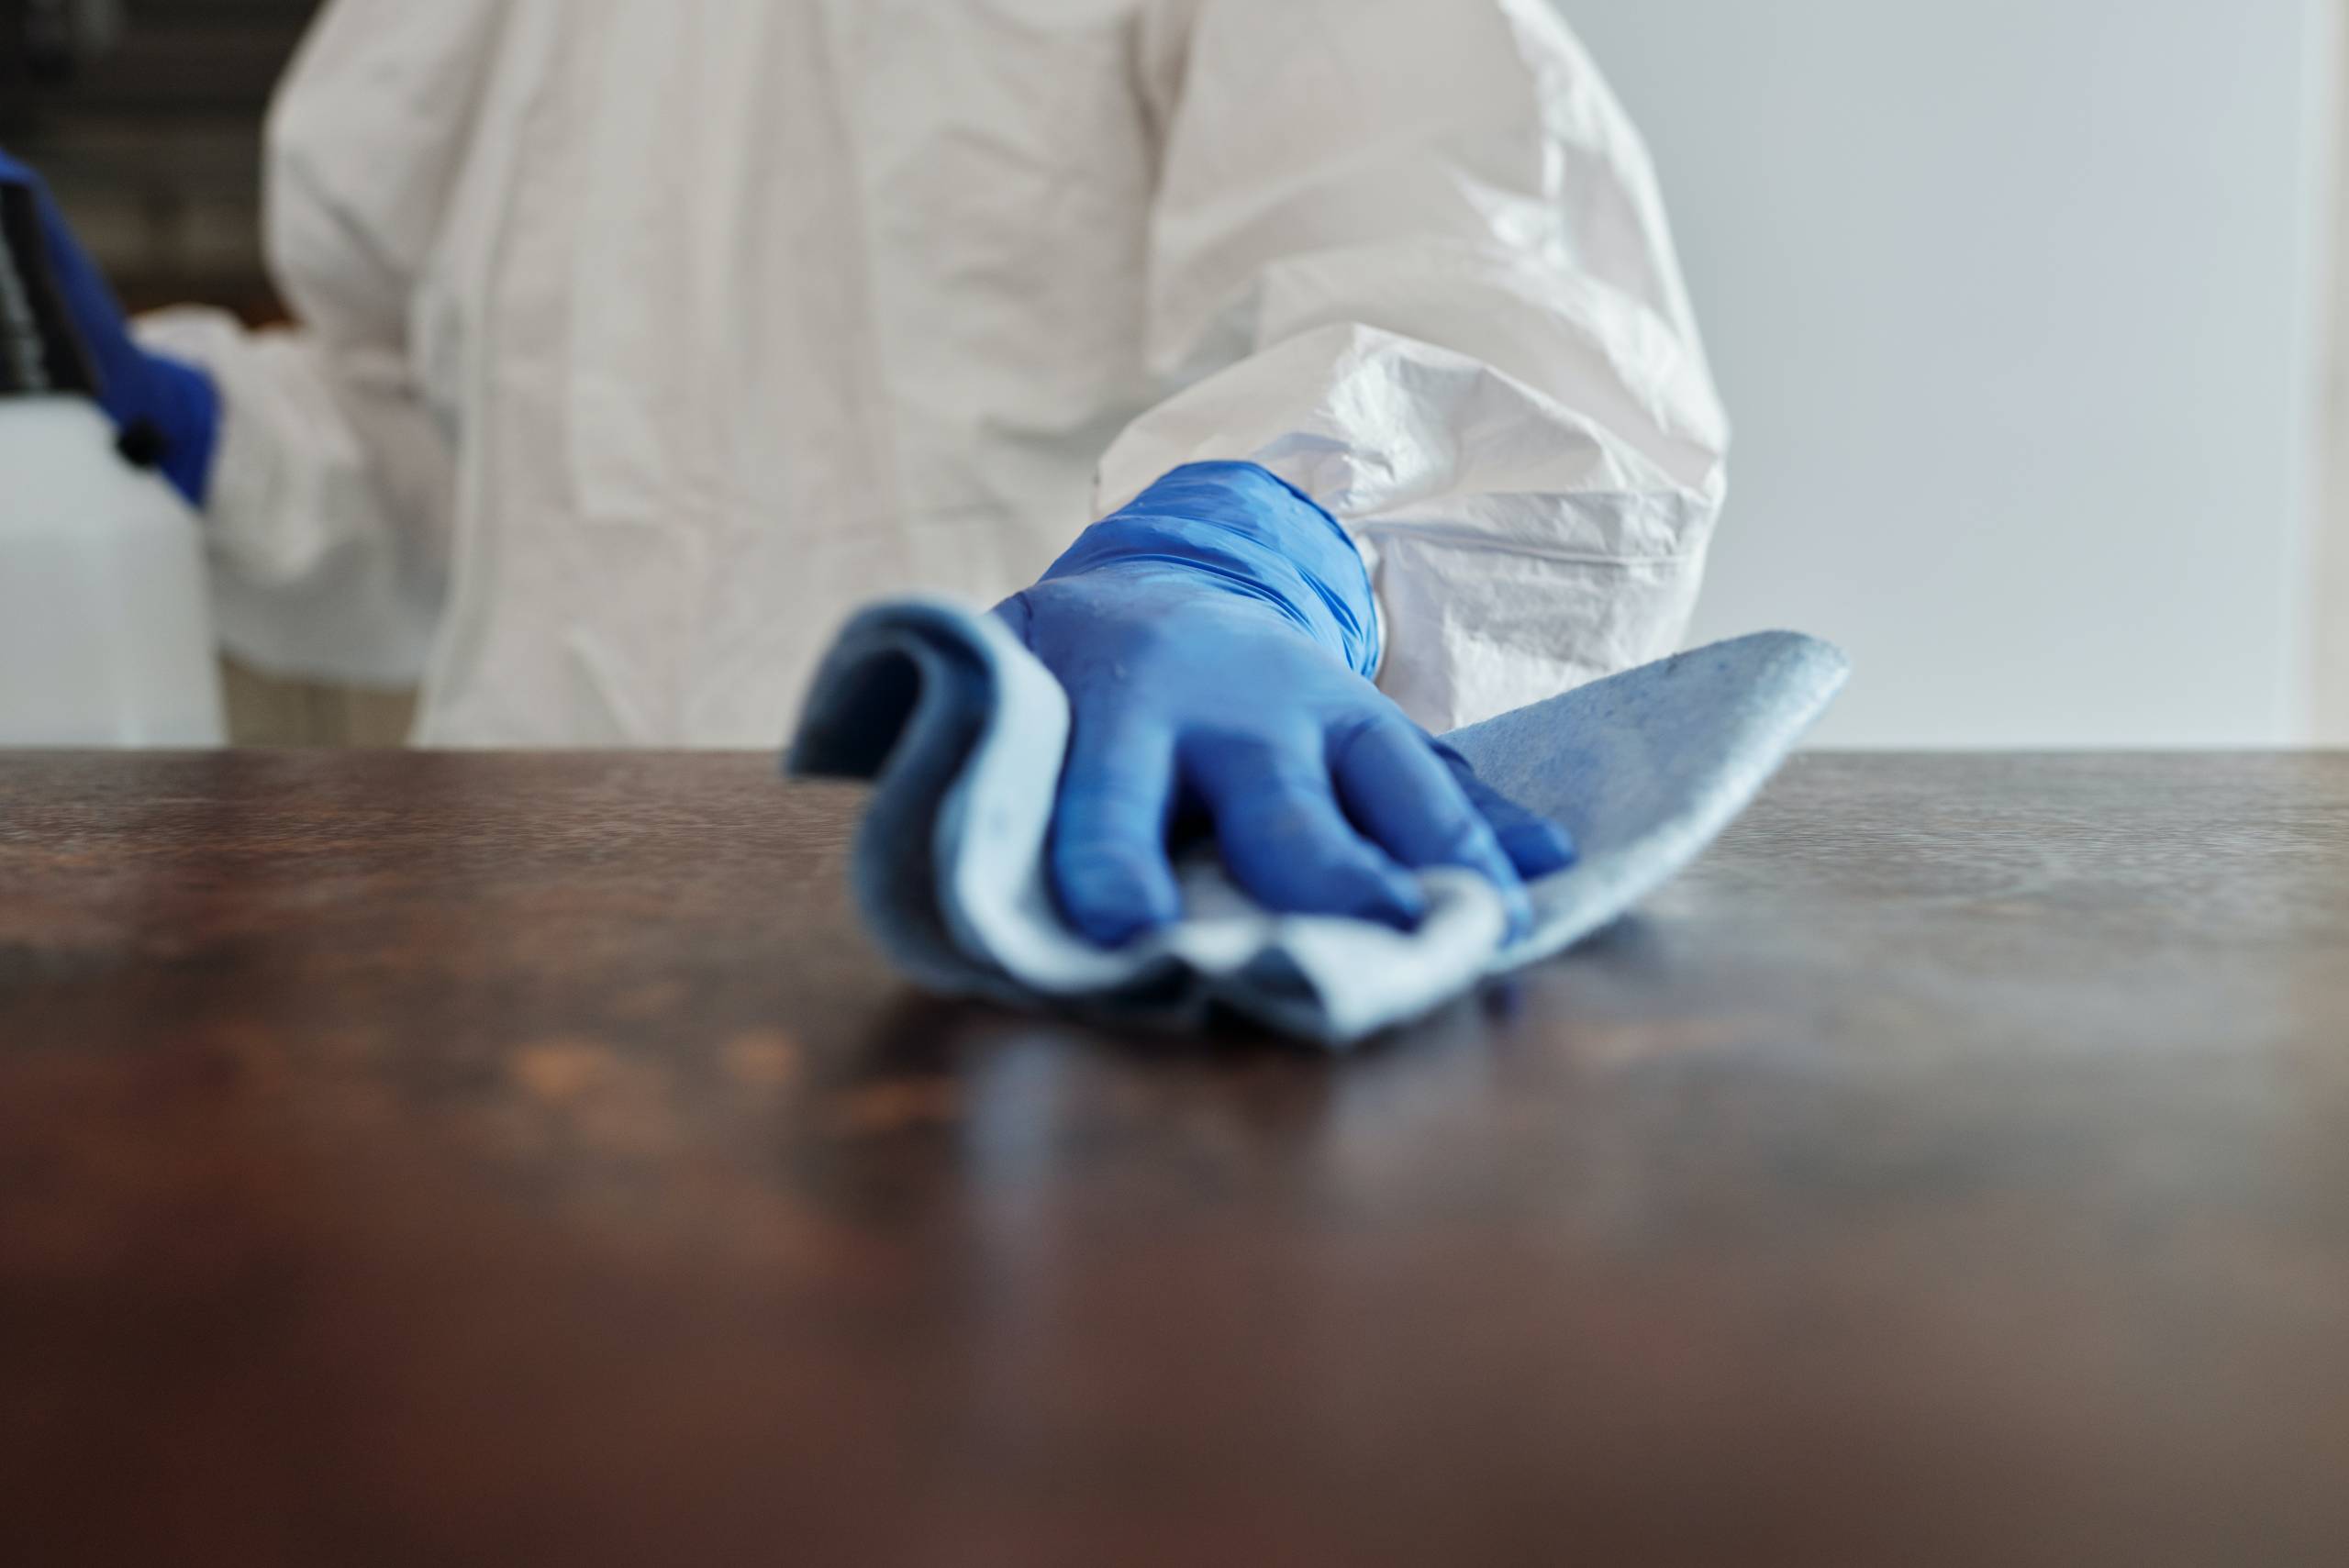 A person wearing personal protective equipment wipes down a table indoors.